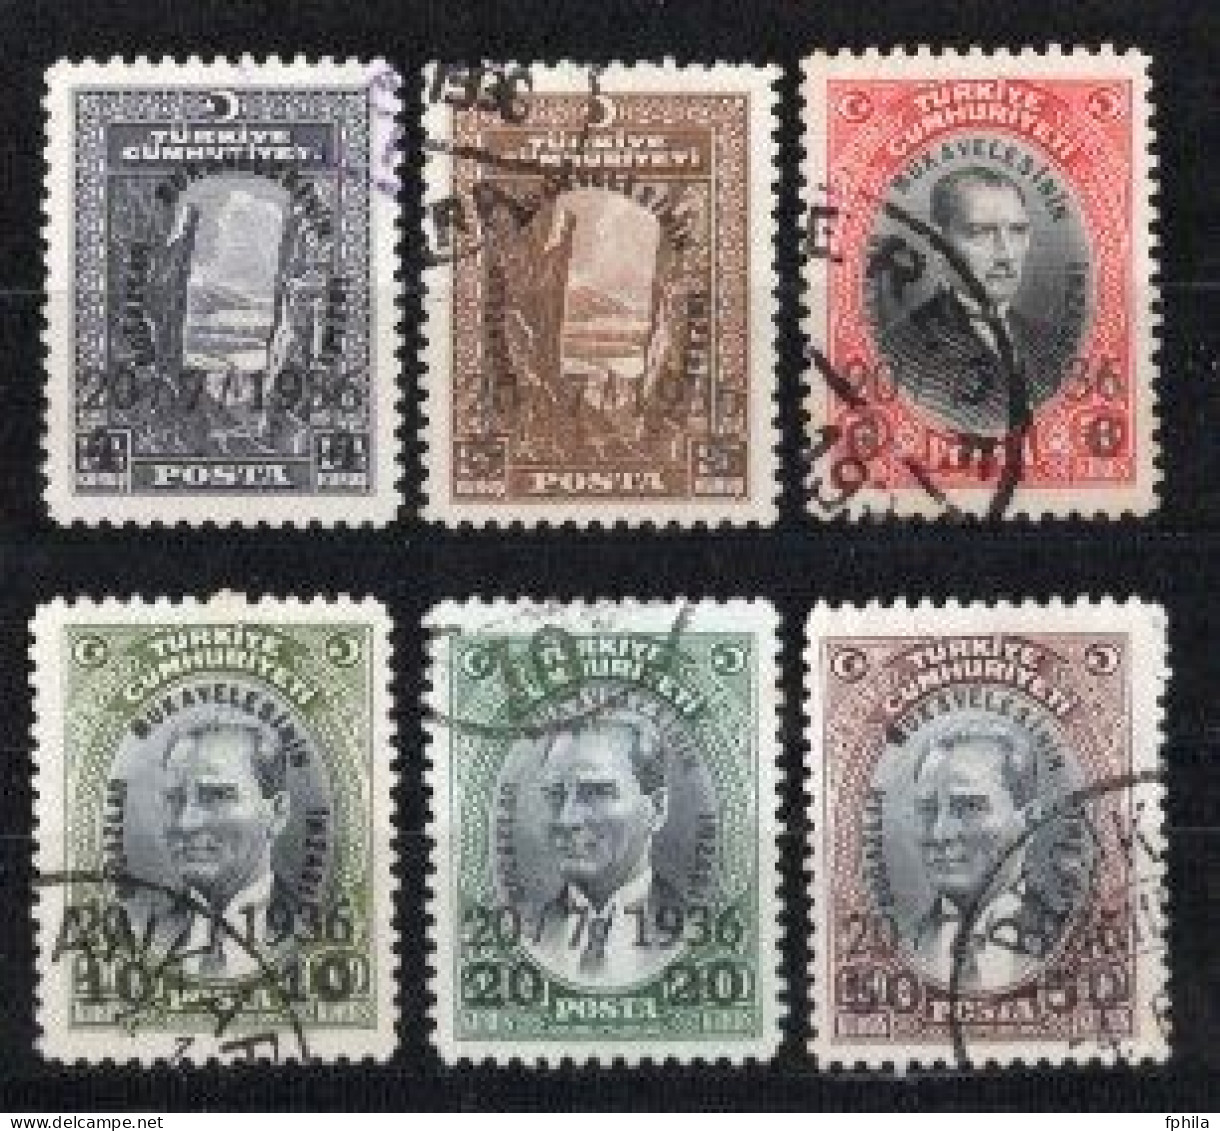 1936 TURKEY SURCHARGED COMMEMORATIVE STAMPS FOR THE SIGNATURE OF THE STRAITS SETTLEMENT USED - Used Stamps